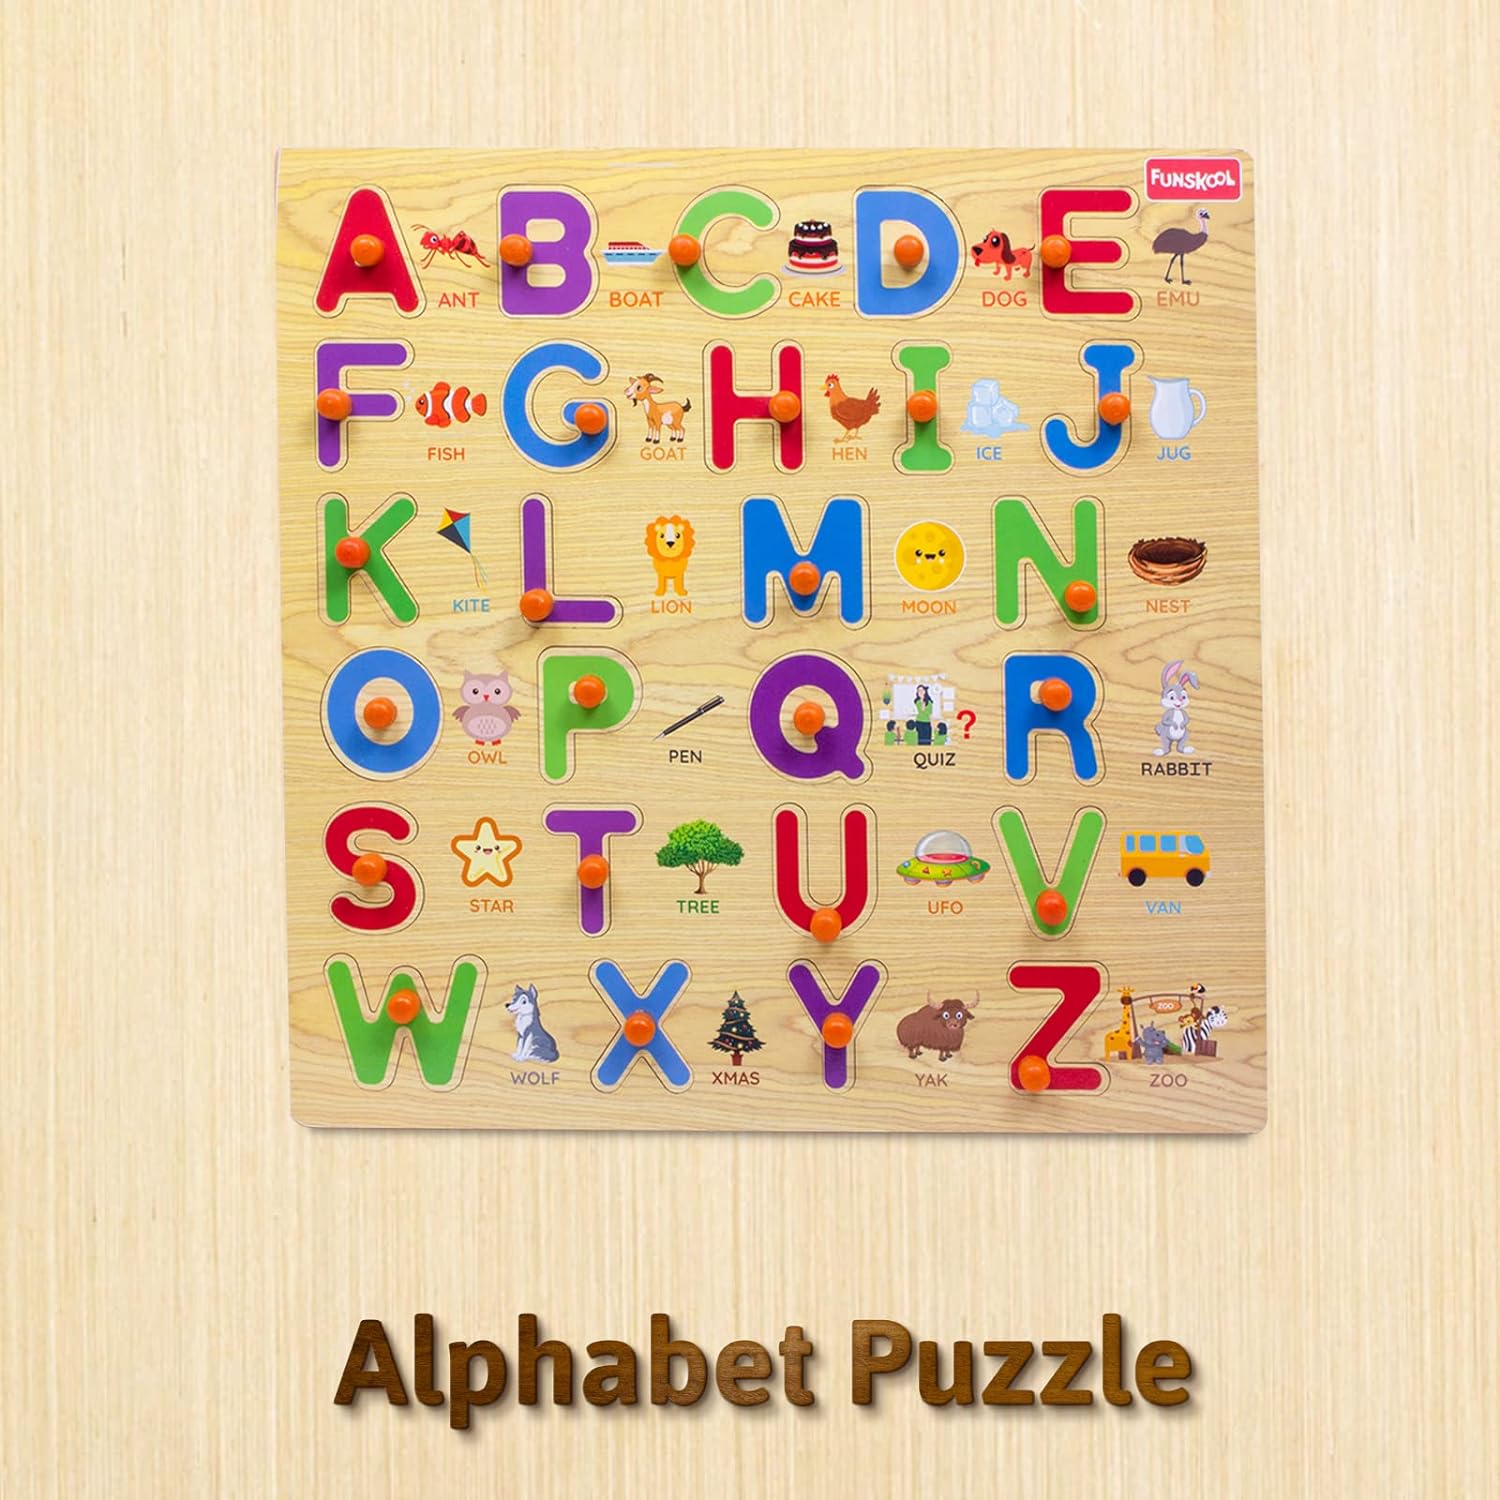 Funskool Alphabet Wooden ABC Puzzle Shape Learning Puzzles Game (26 Pcs) for Kids 3 Years & Above